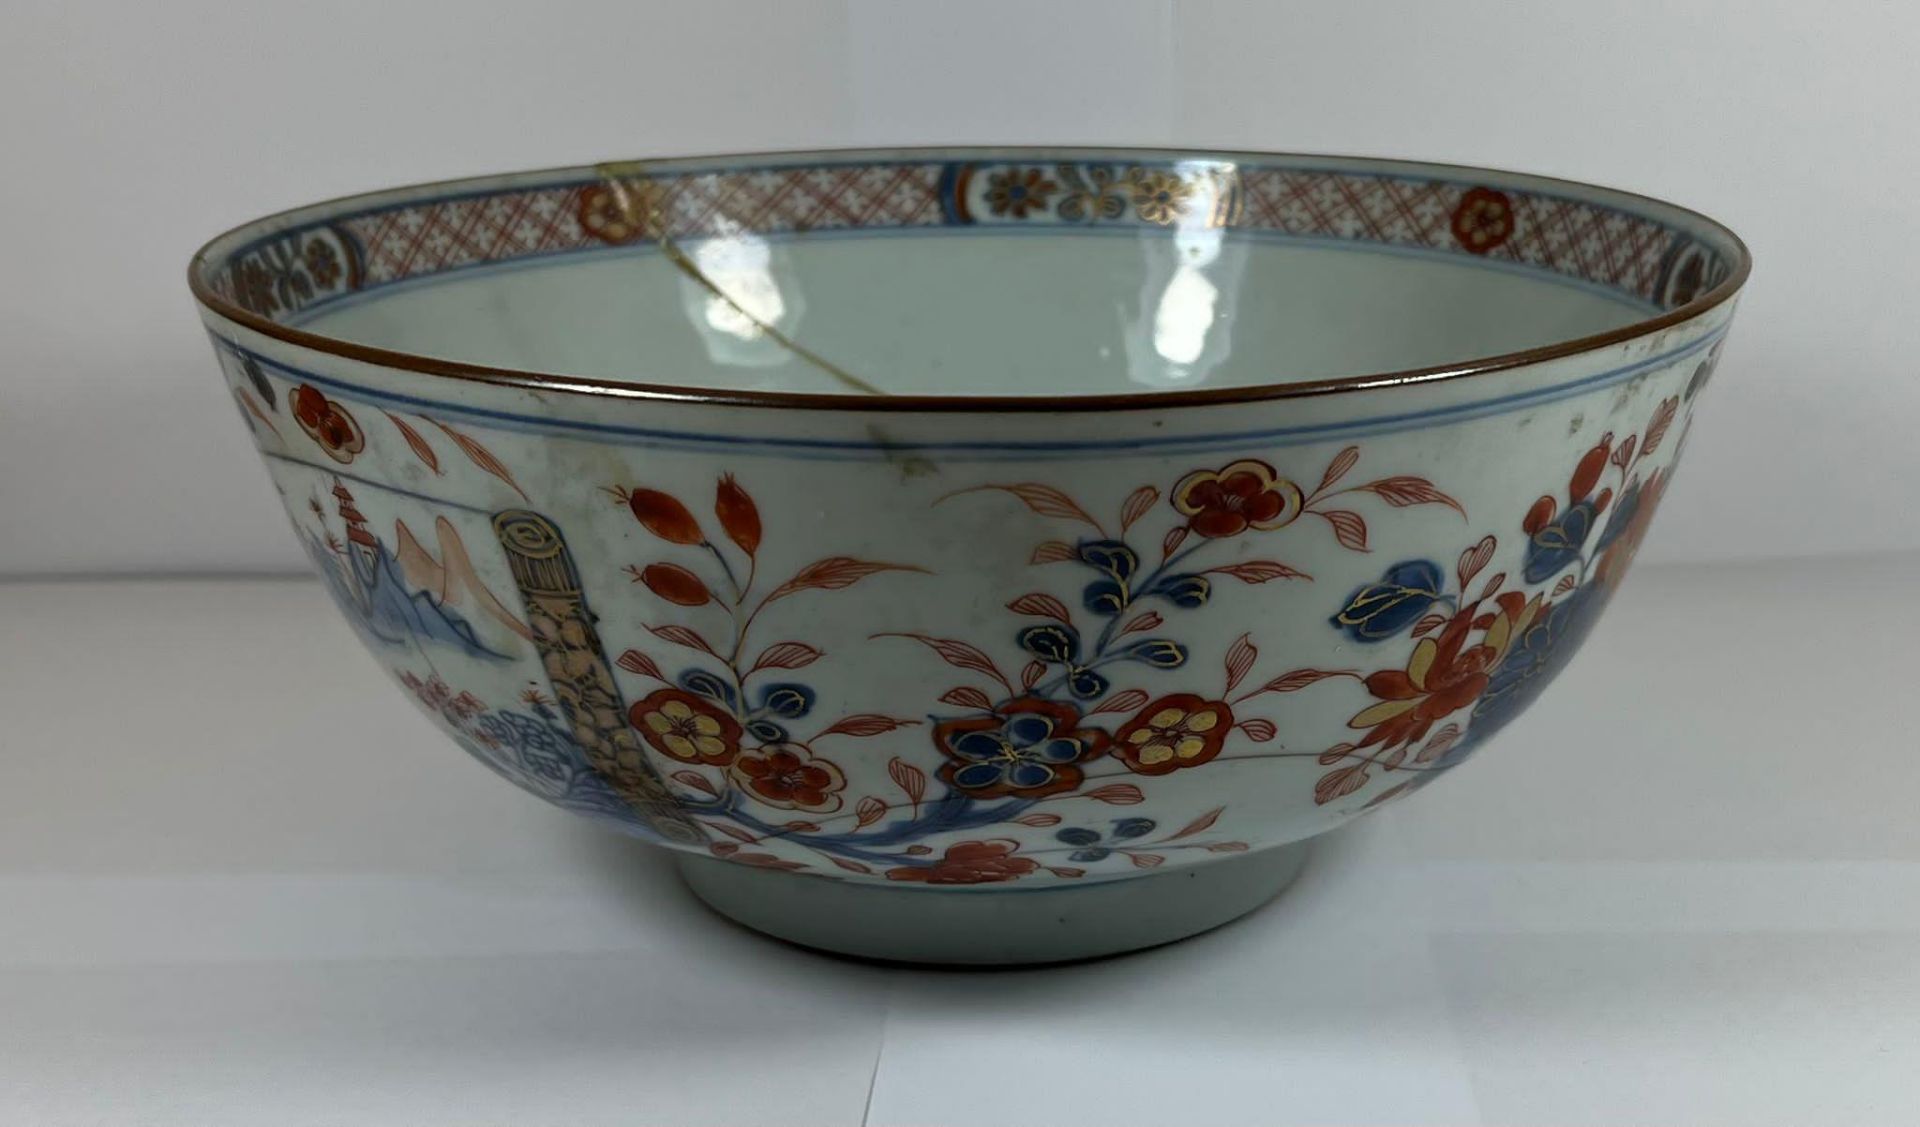 AN 18TH CENTURY CHINESE EXPORT PORCELAIN FRUIT BOWL WITH FLORAL DESIGN, DIAMETER 23CM, HEIGHT 11CM - Image 6 of 6